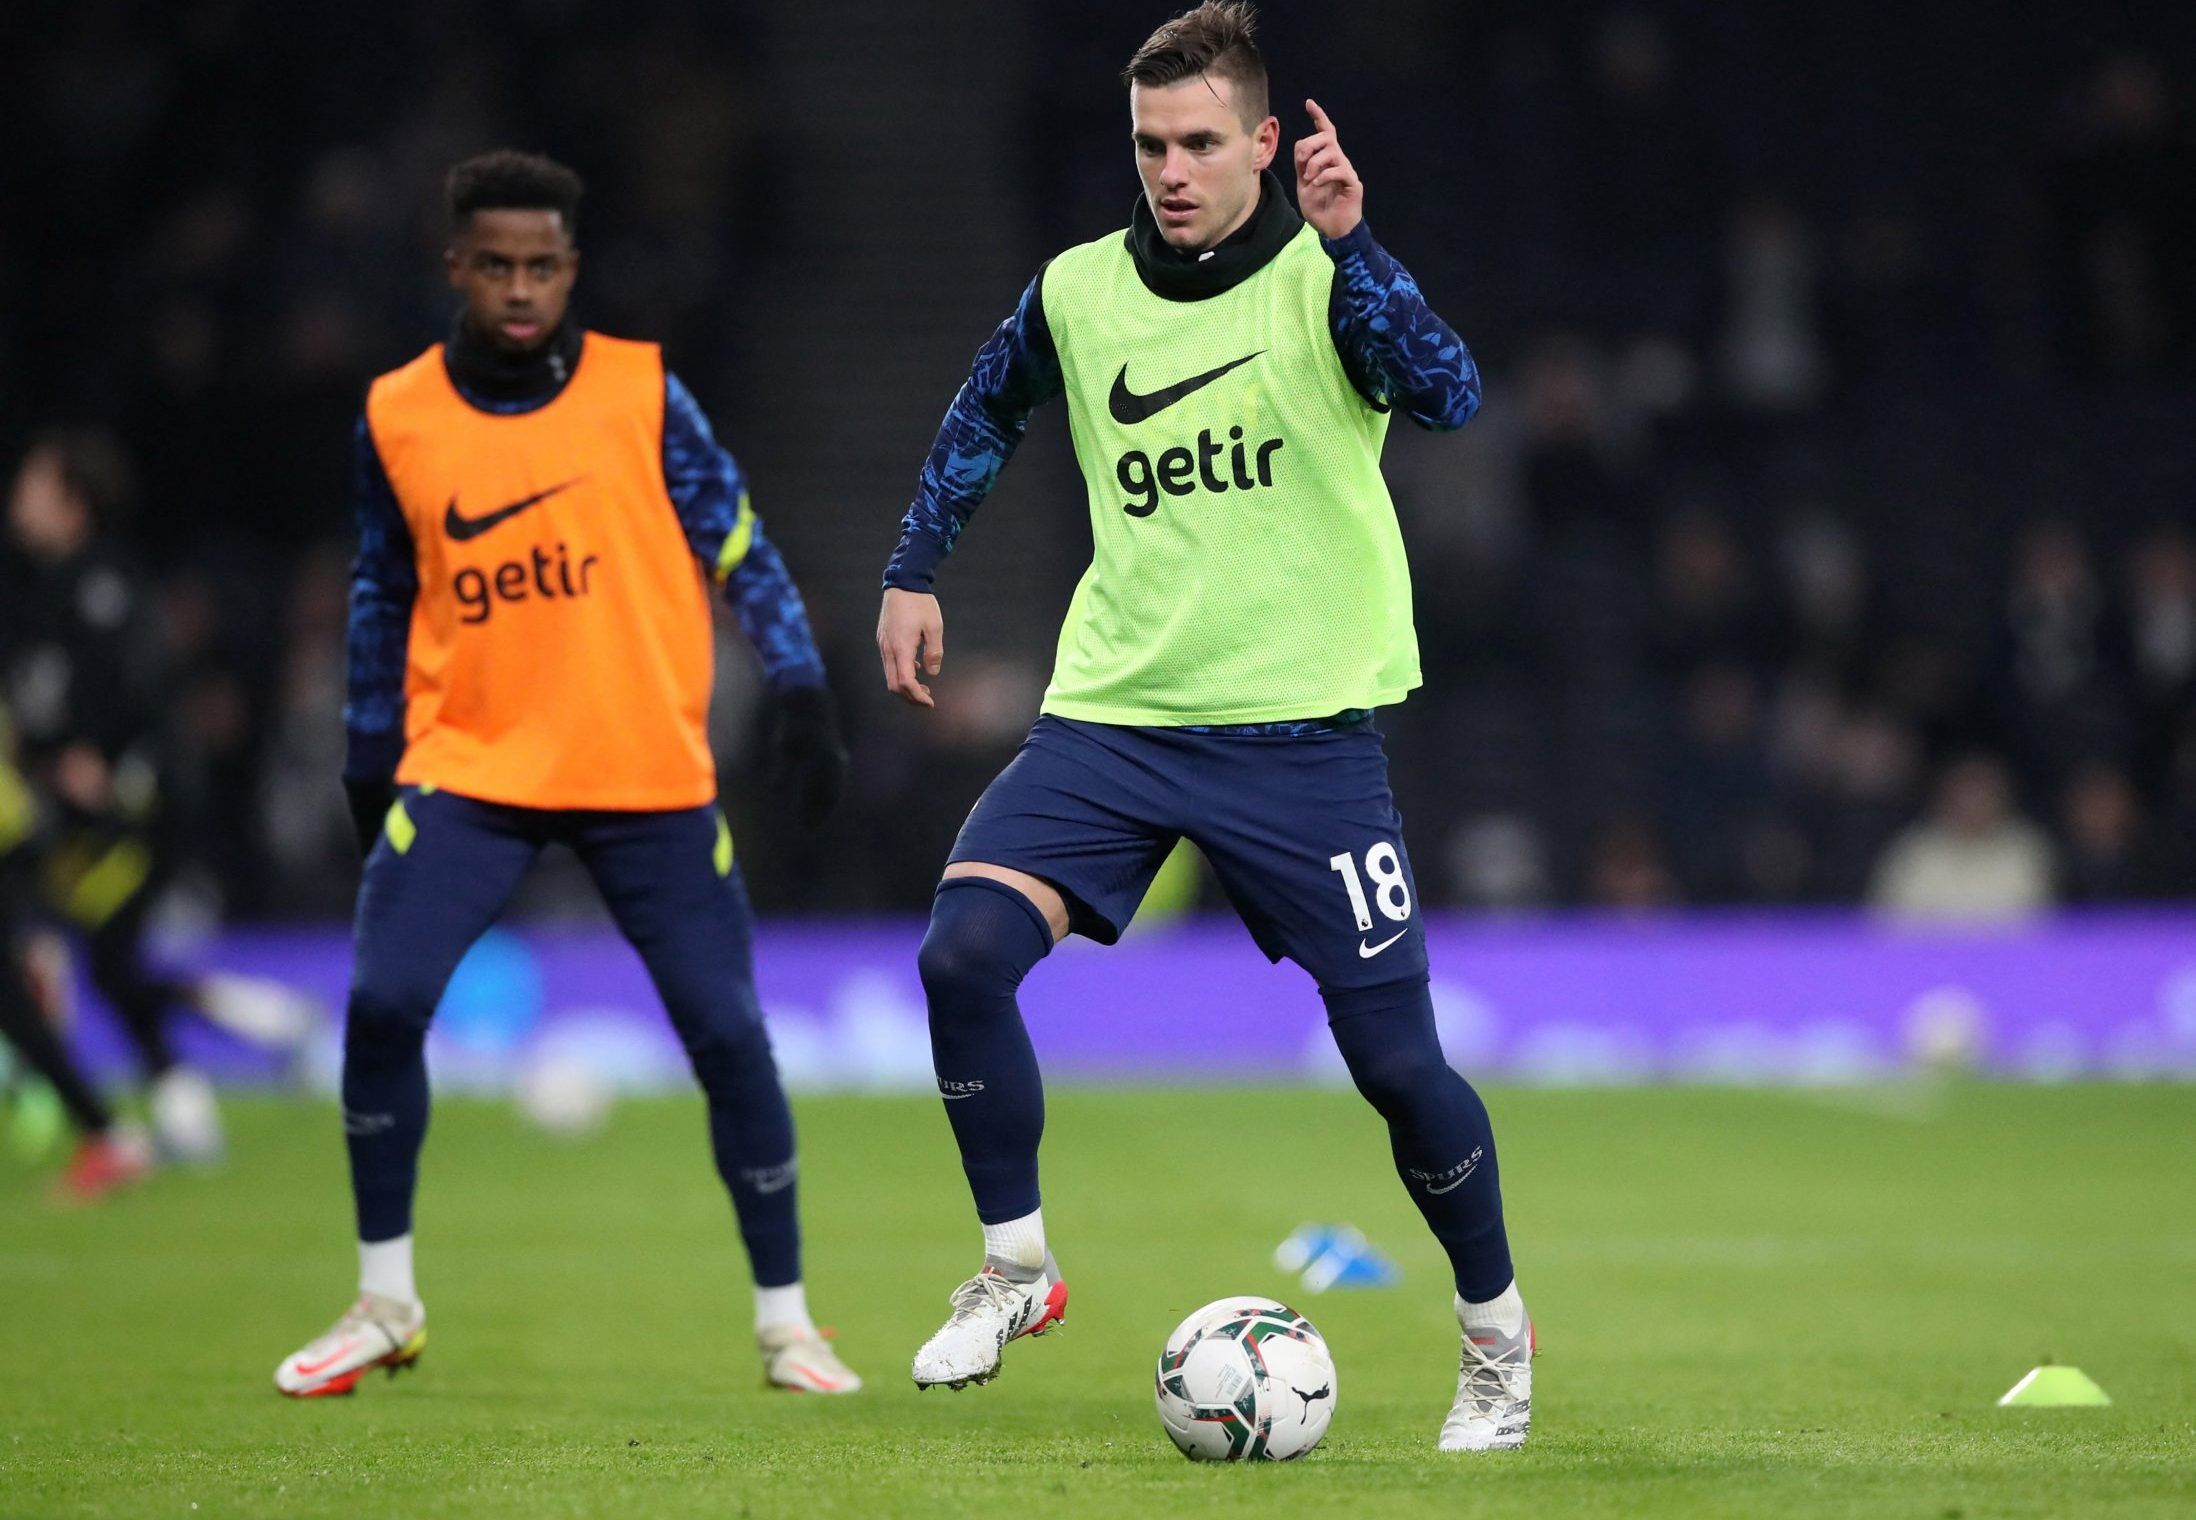 Spurs midfielder Giovani Lo Celso during warm up before Carabao Cup clash with Chelsea